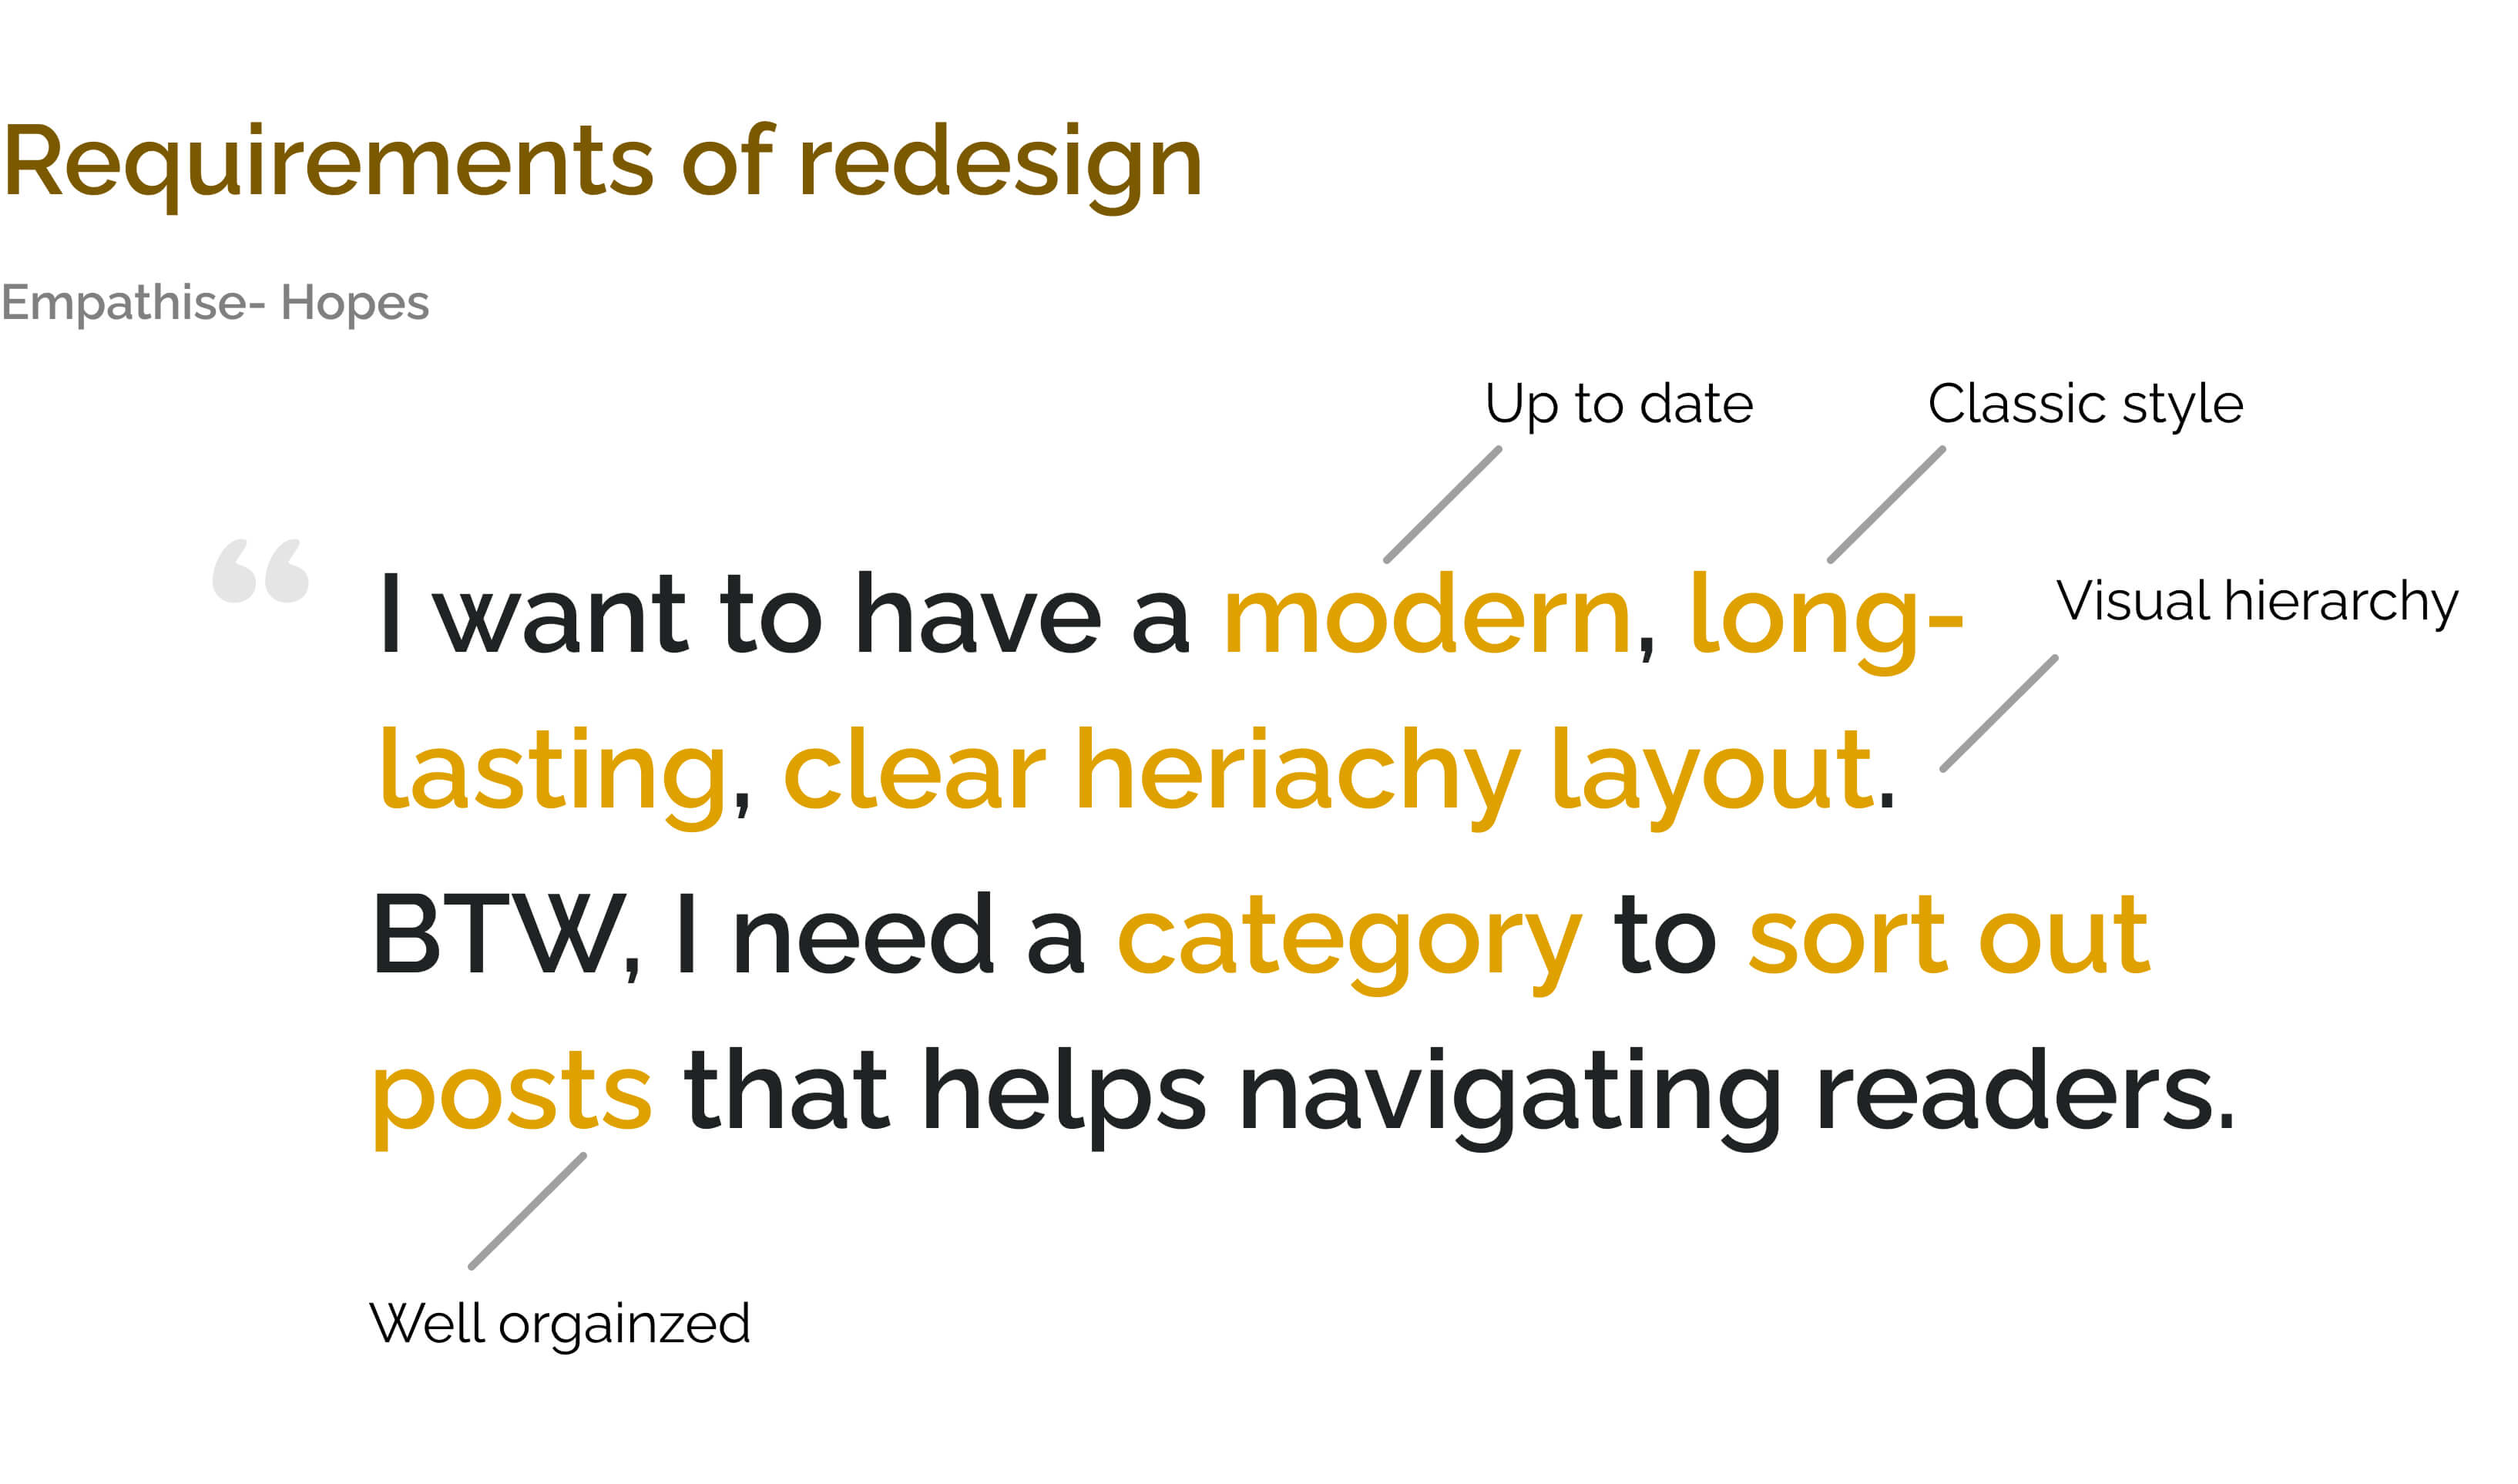 Requirements of redesign